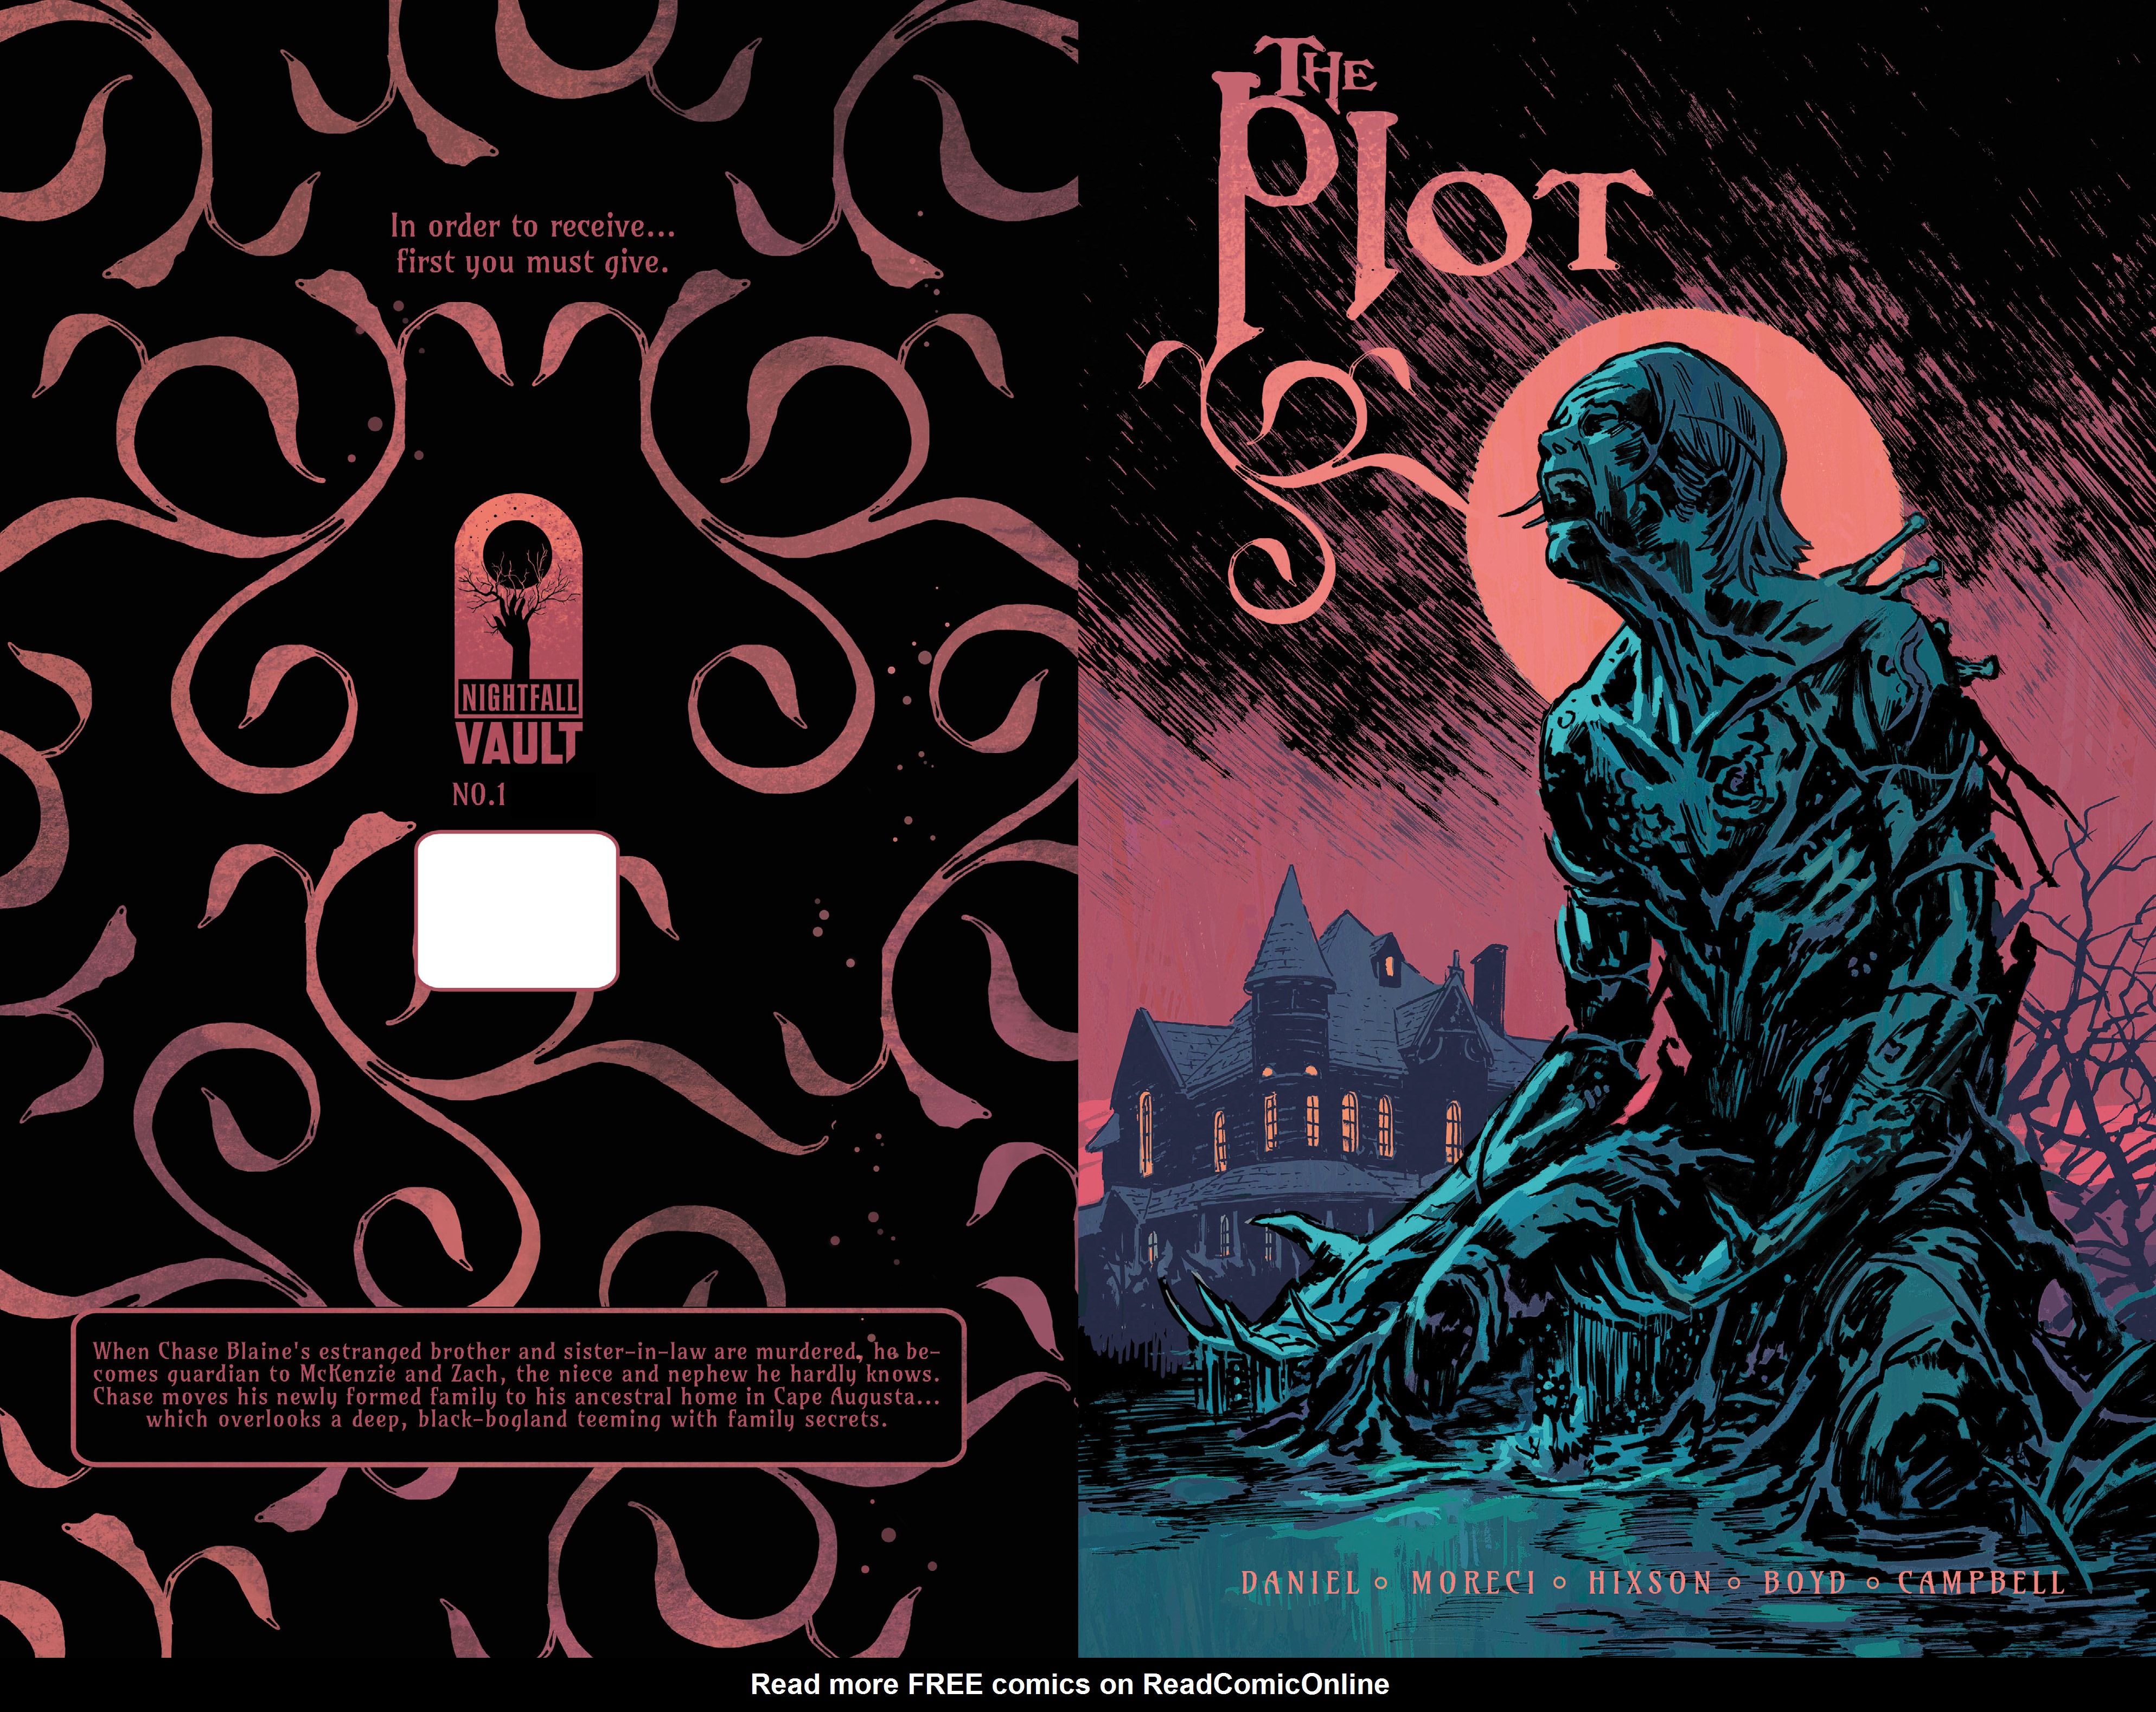 Read online The Plot comic -  Issue #1 - 2